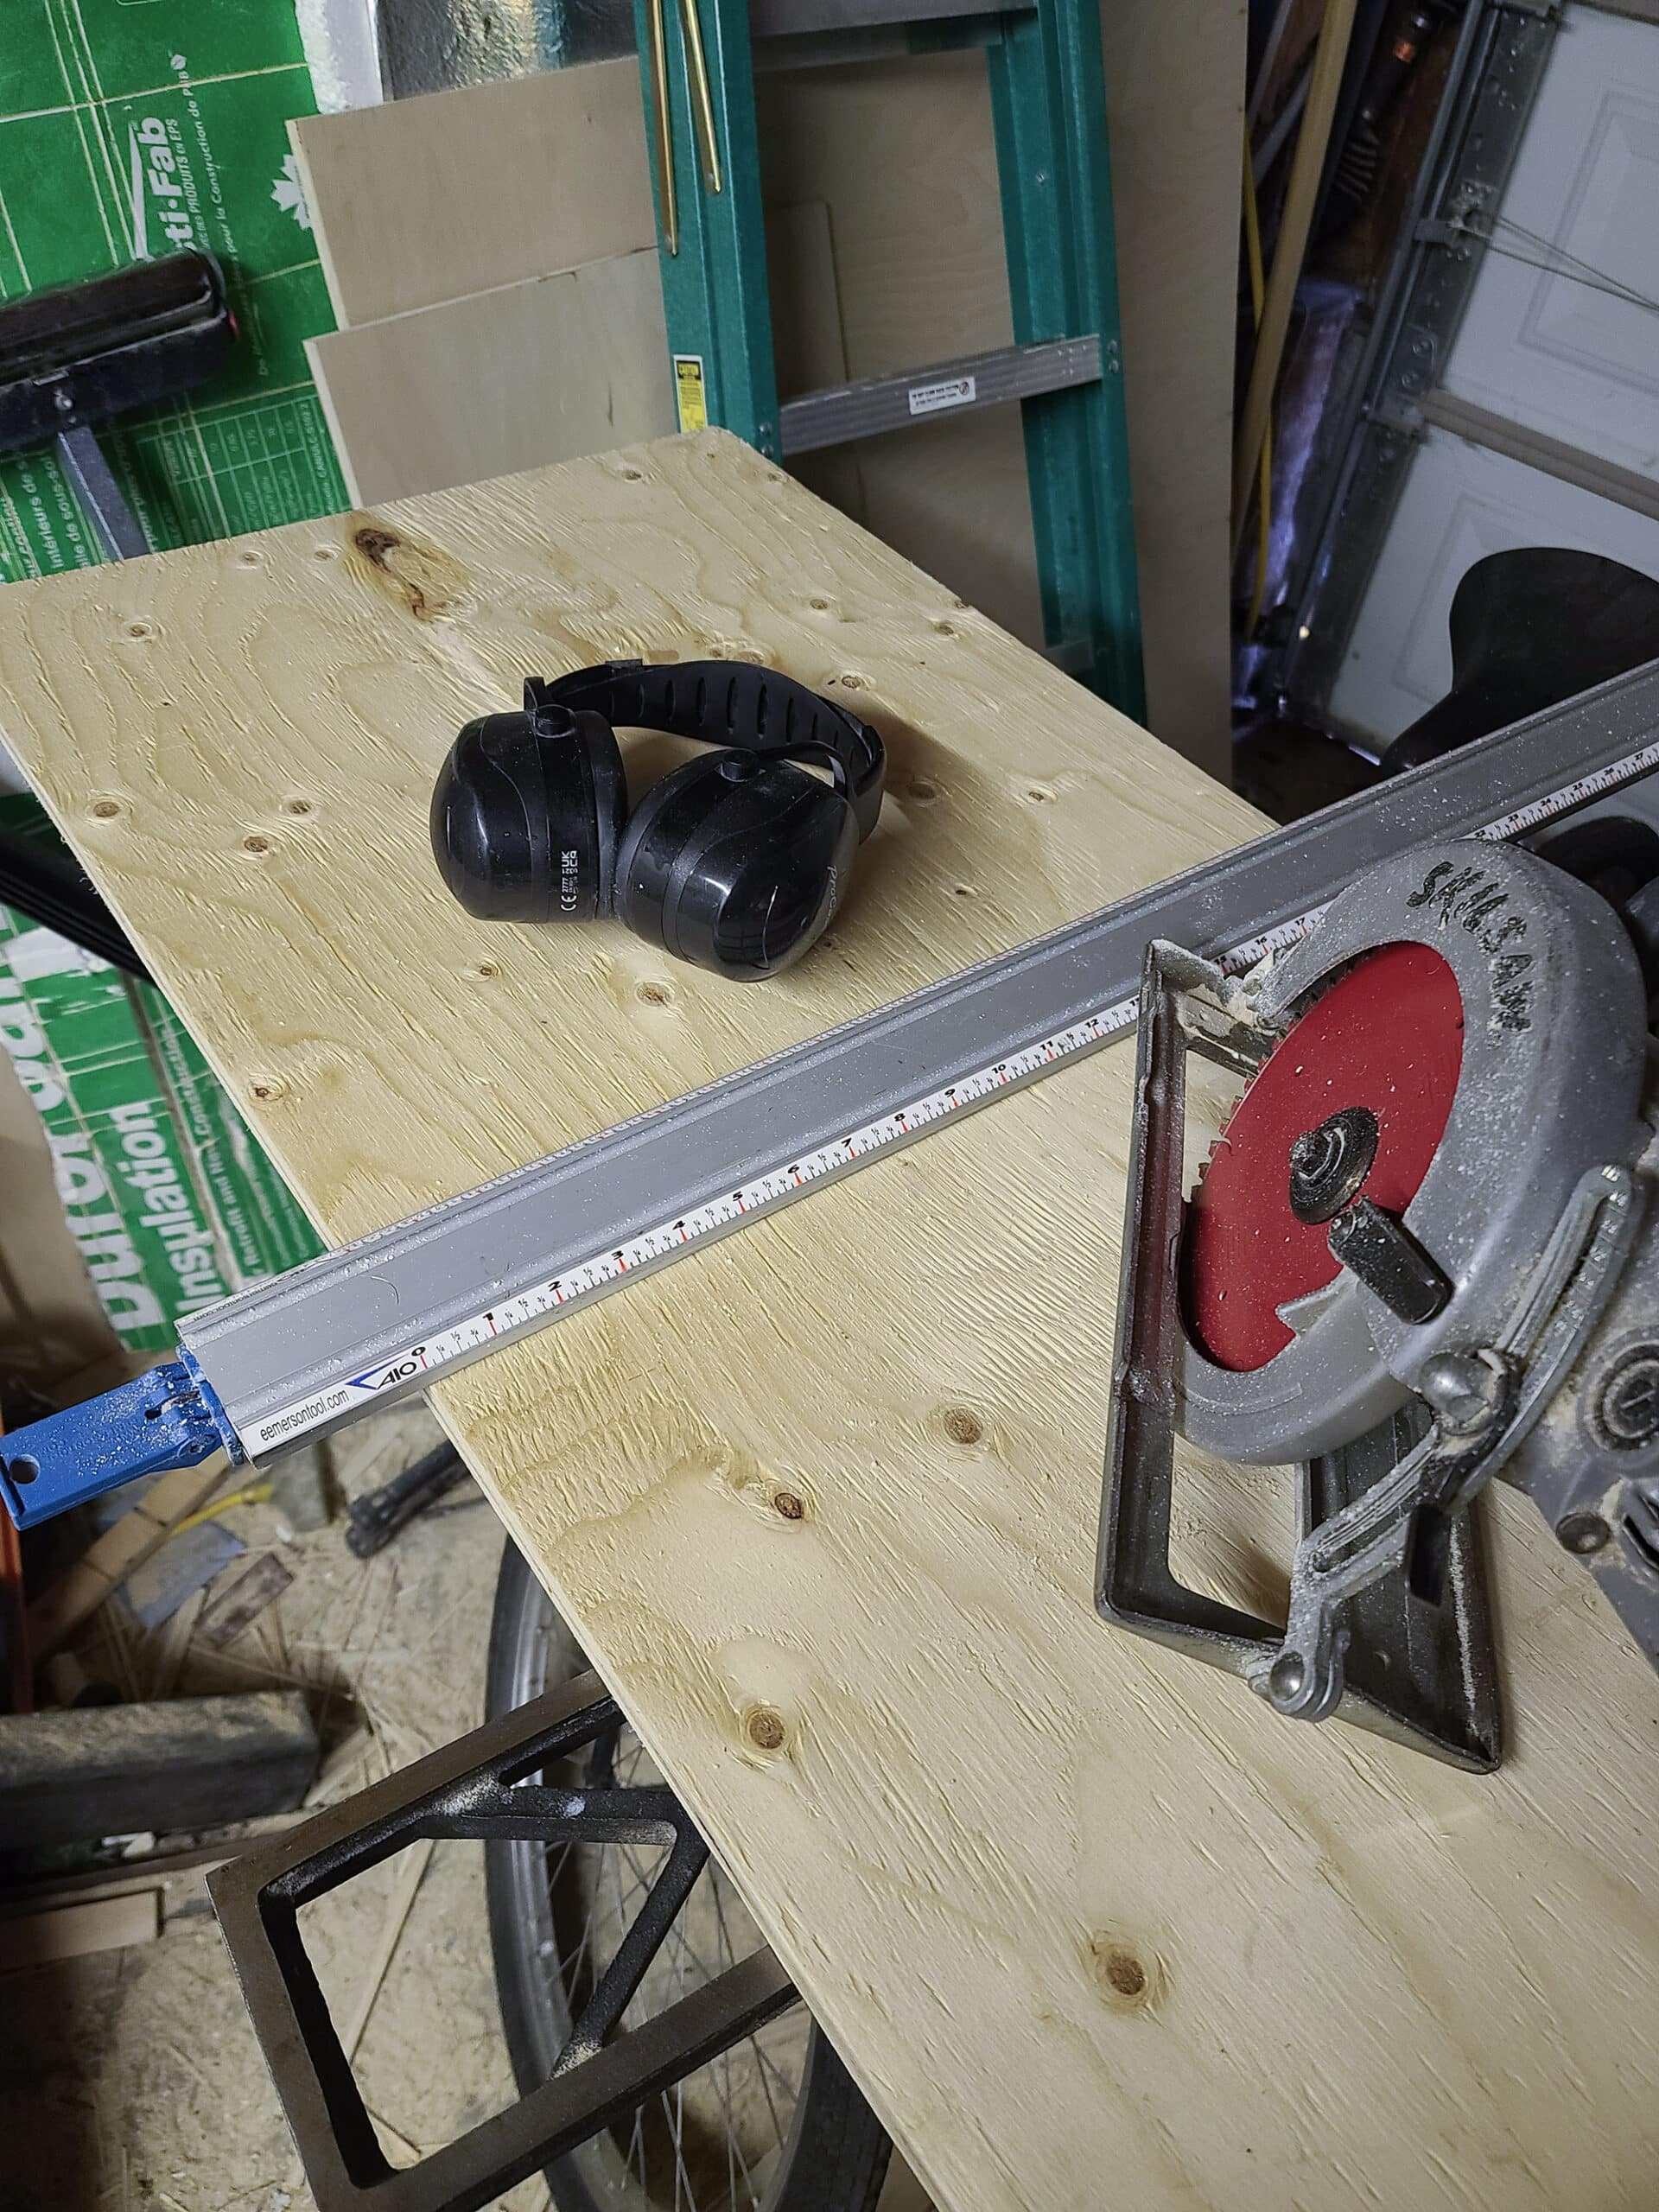 A large piece of plywood, a cutting straight edge, a pair of hearing protection muffs, and a worm drive circular saw.